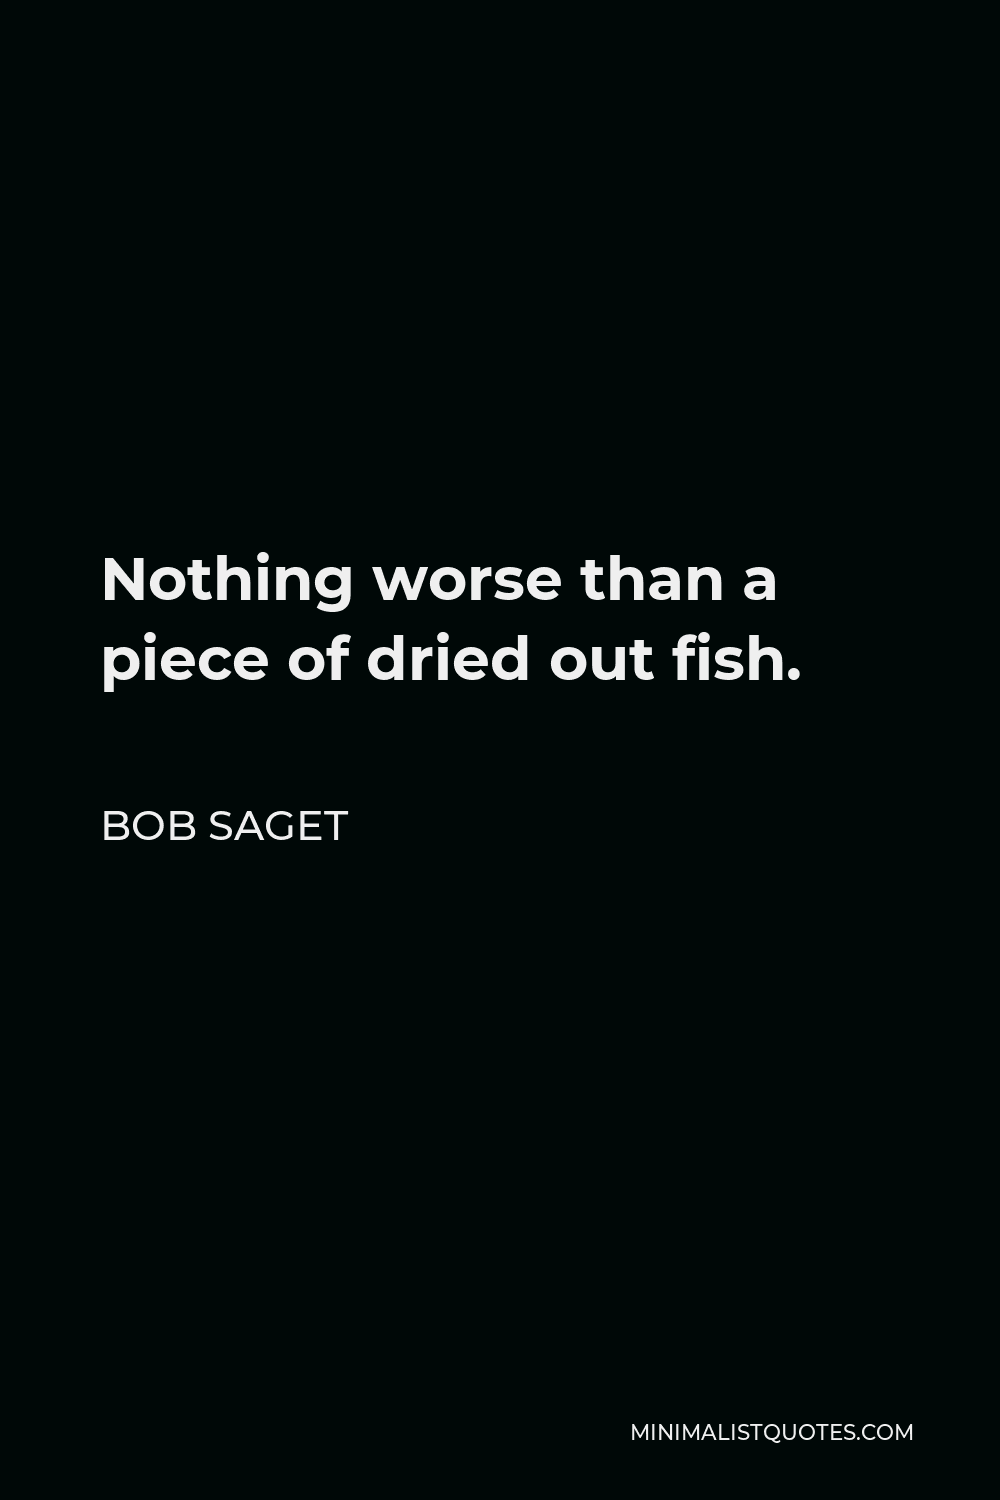 Bob Saget Quote - Nothing worse than a piece of dried out fish.